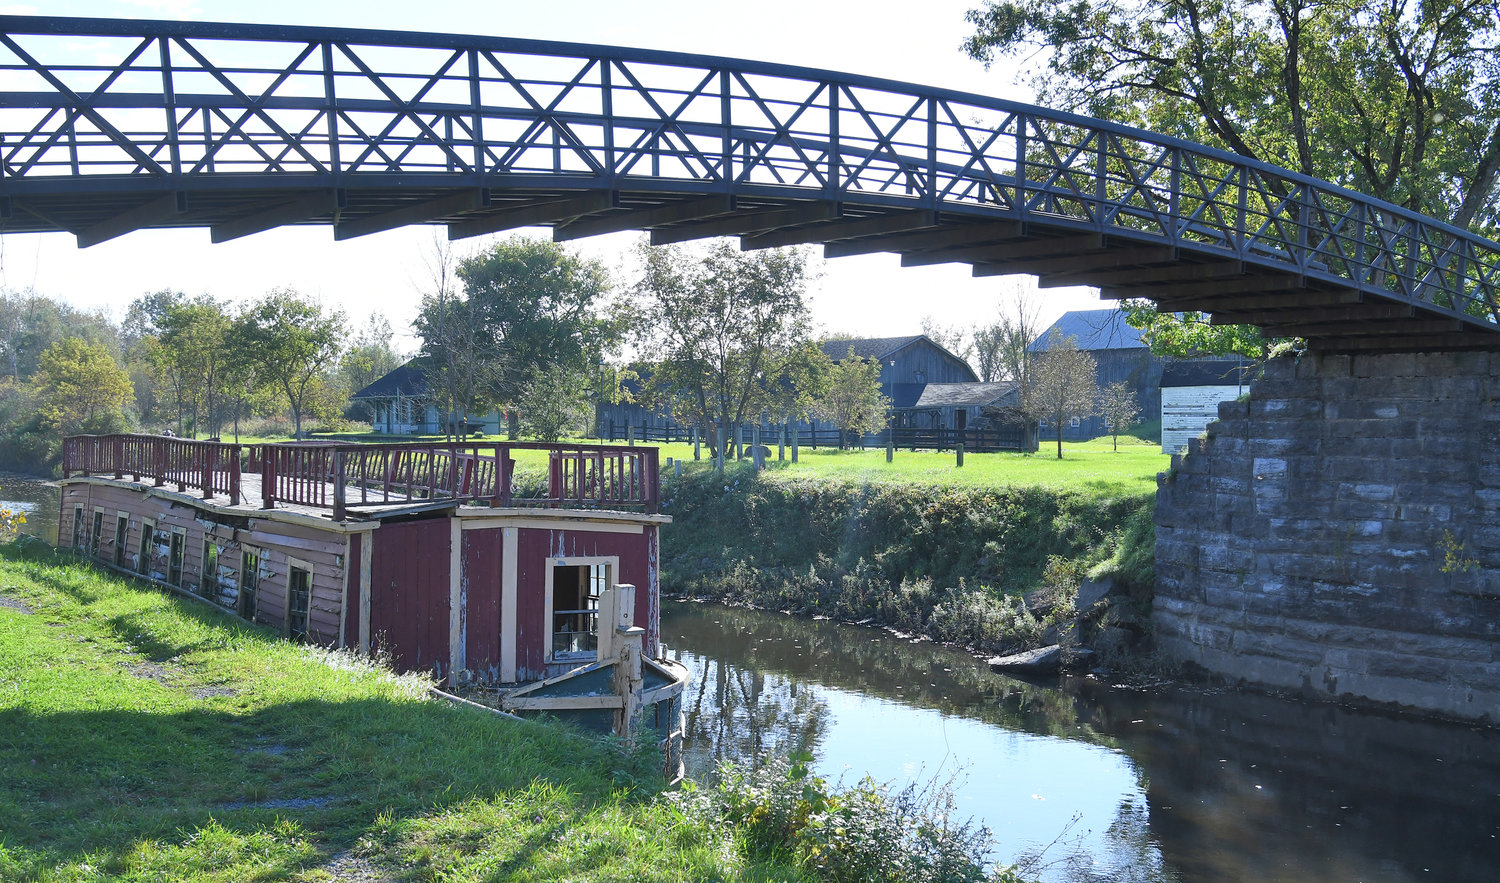 BRIDGING THE GAP — The former Erie Canal Village in west Rome is shown in this October file photo. Proposed legislation before the city’s Common Council could create a new Heritage District, paving the way for much needed improvements and repairs of the site.